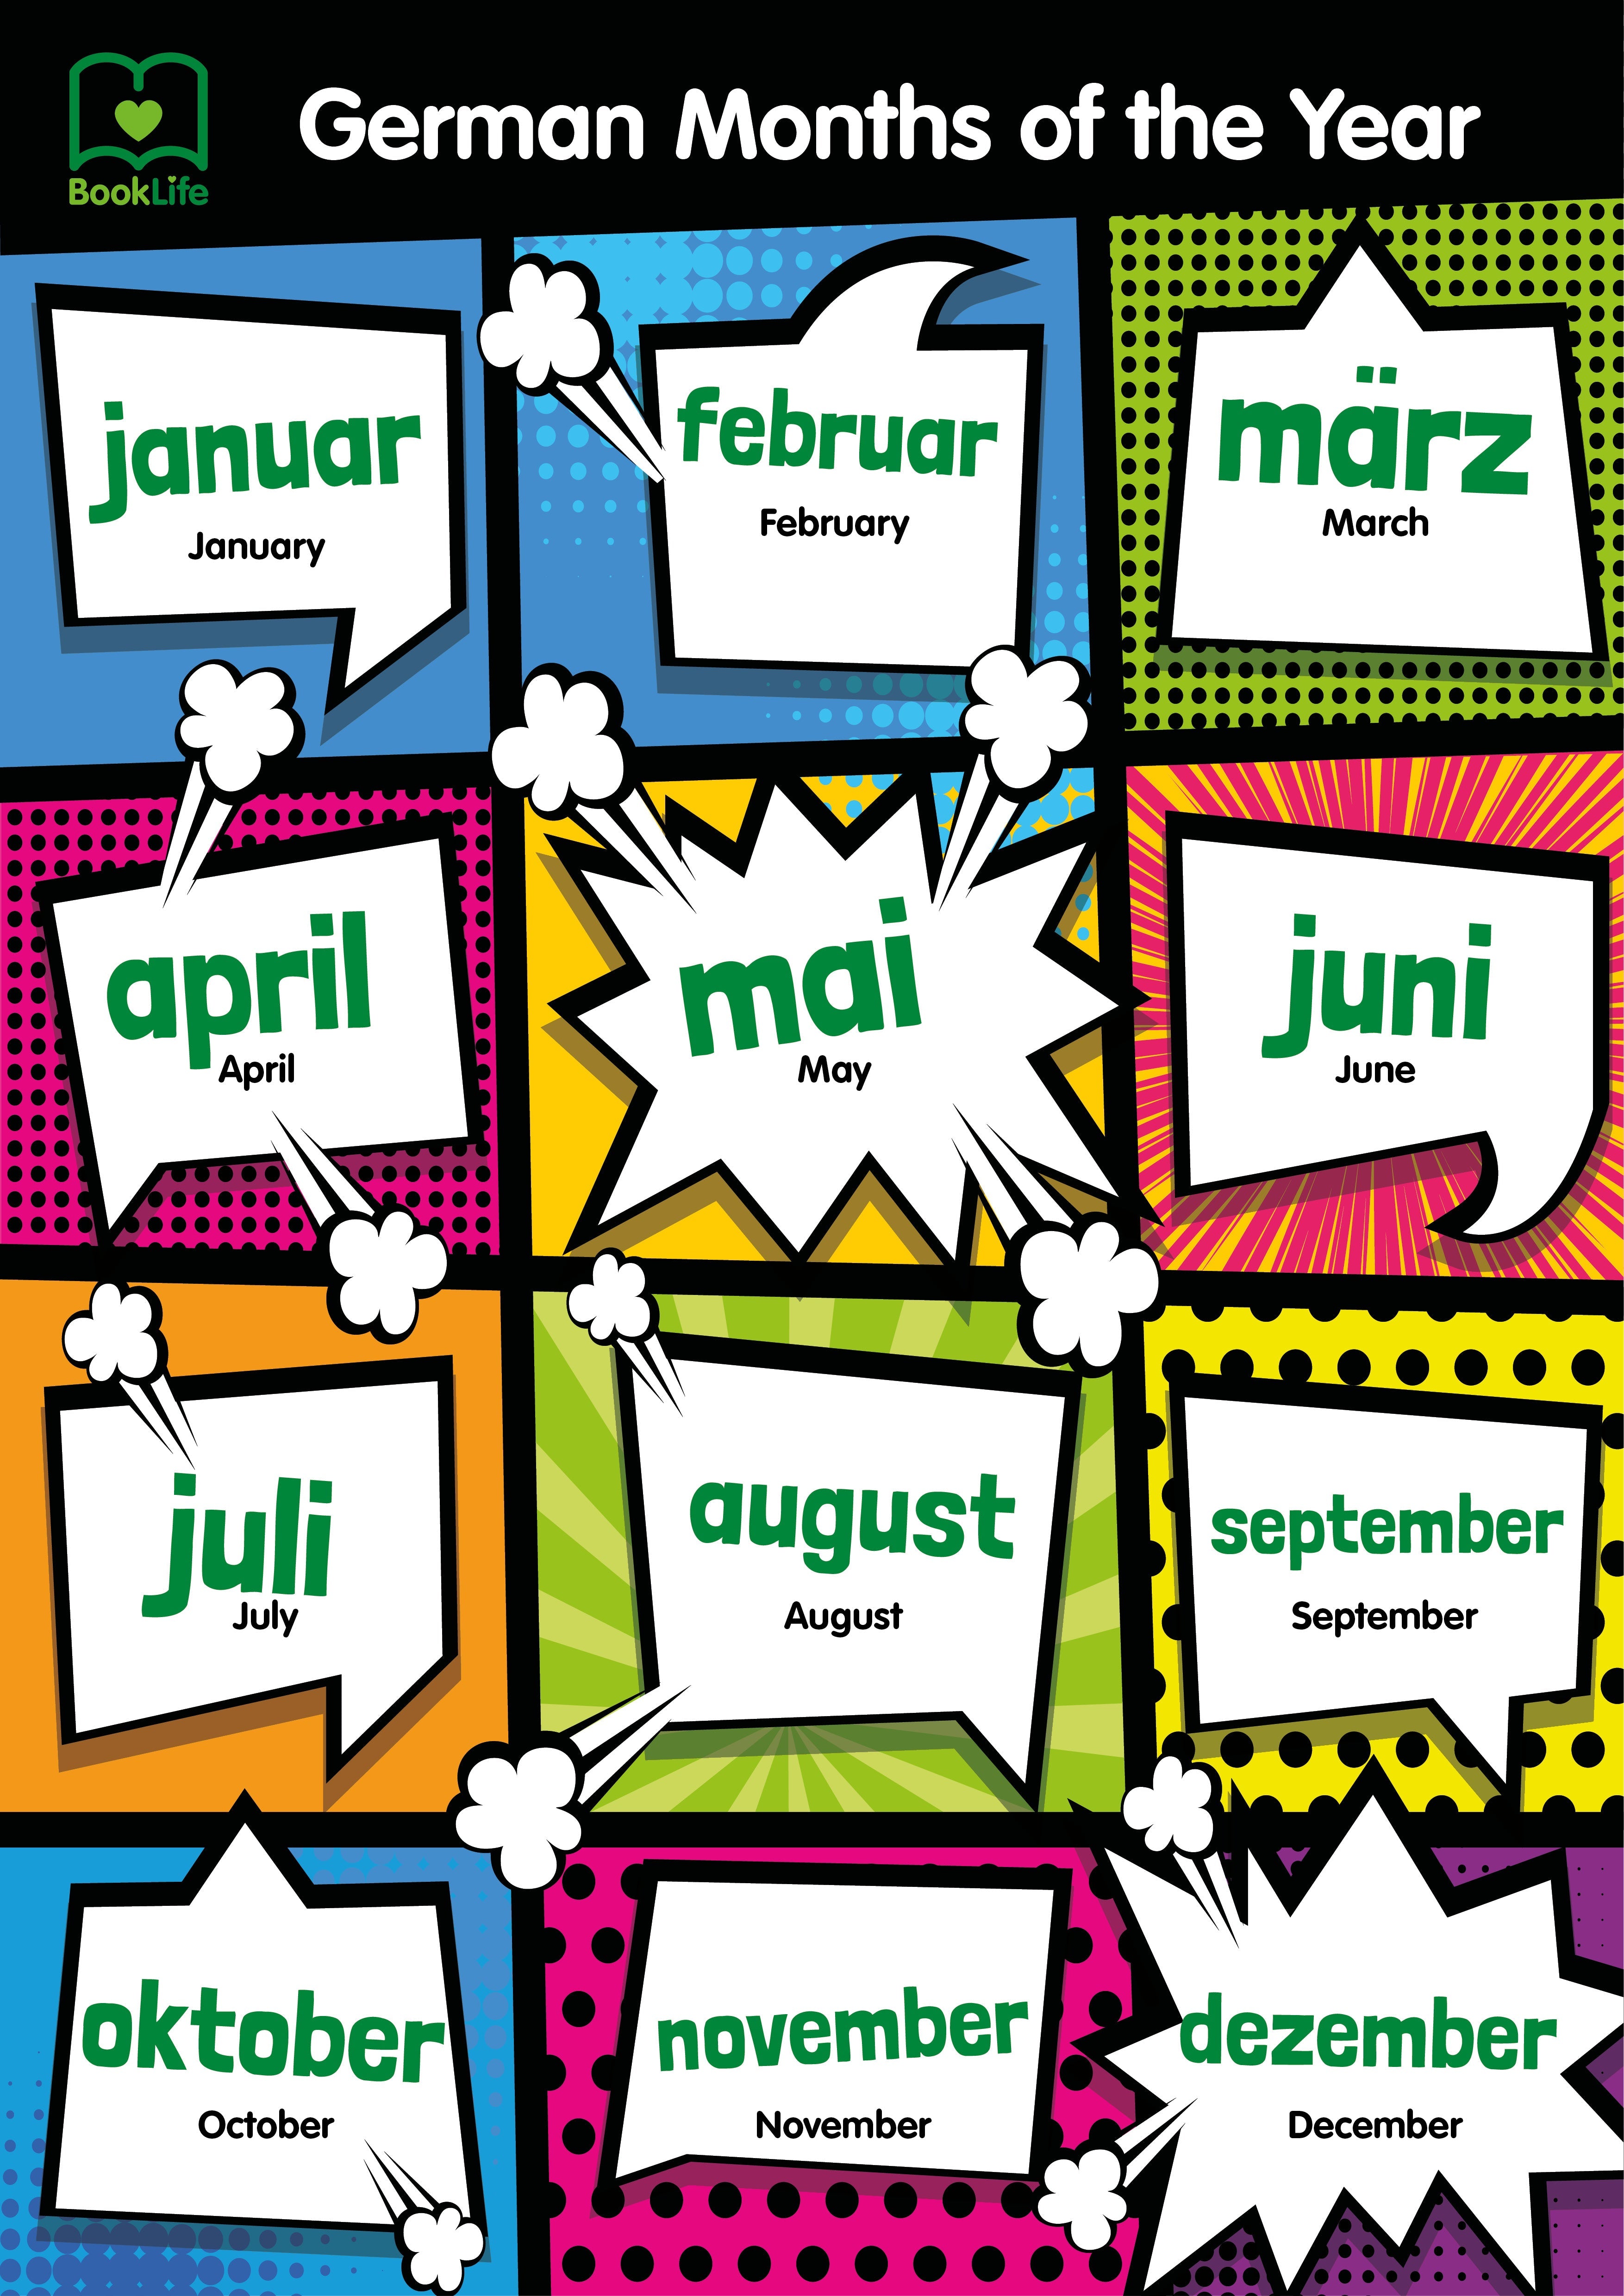 Free German Month of the Year Poster by BookLife